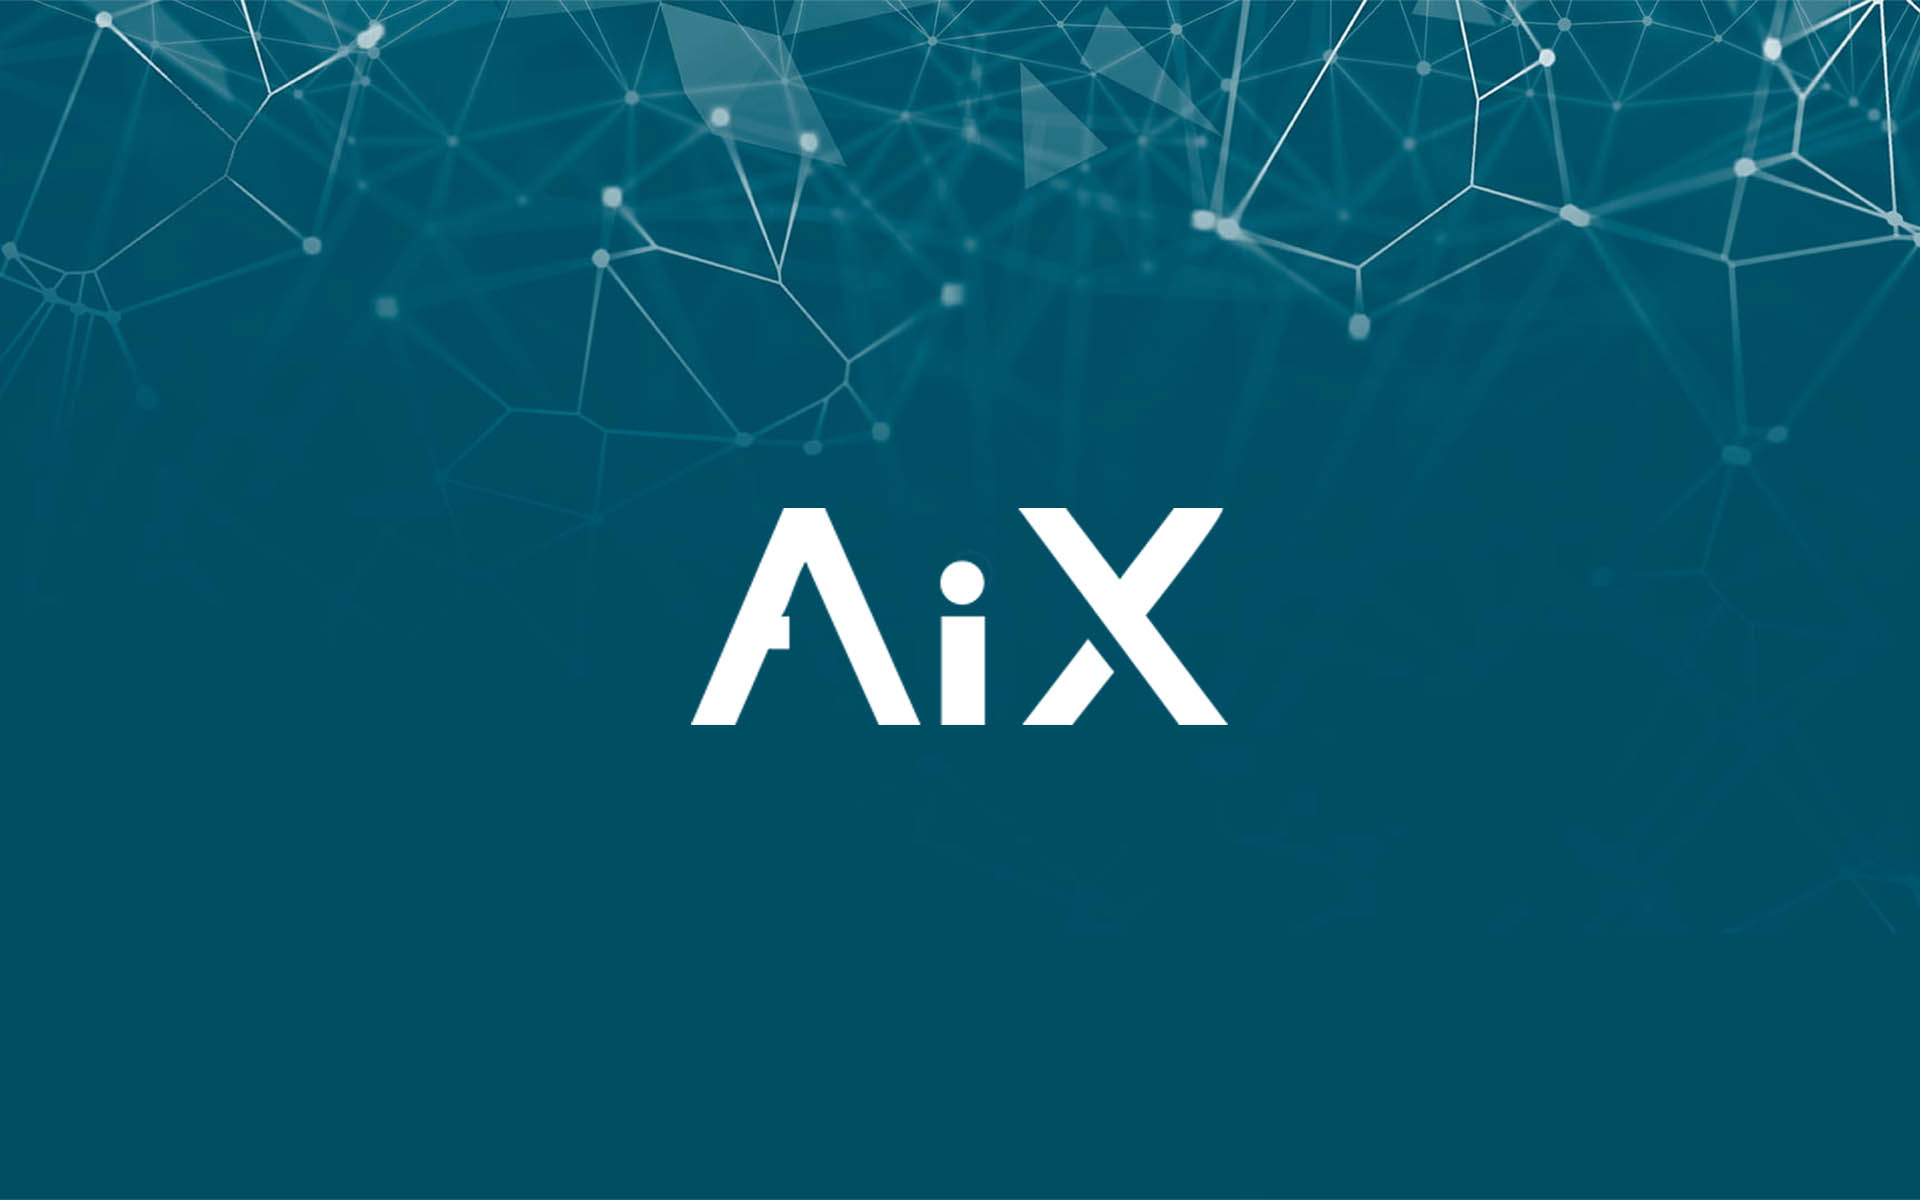 AiX Announces the First Artificial Intelligence Broker to Bridge Cryptocurrencies and Traditional Financial Markets